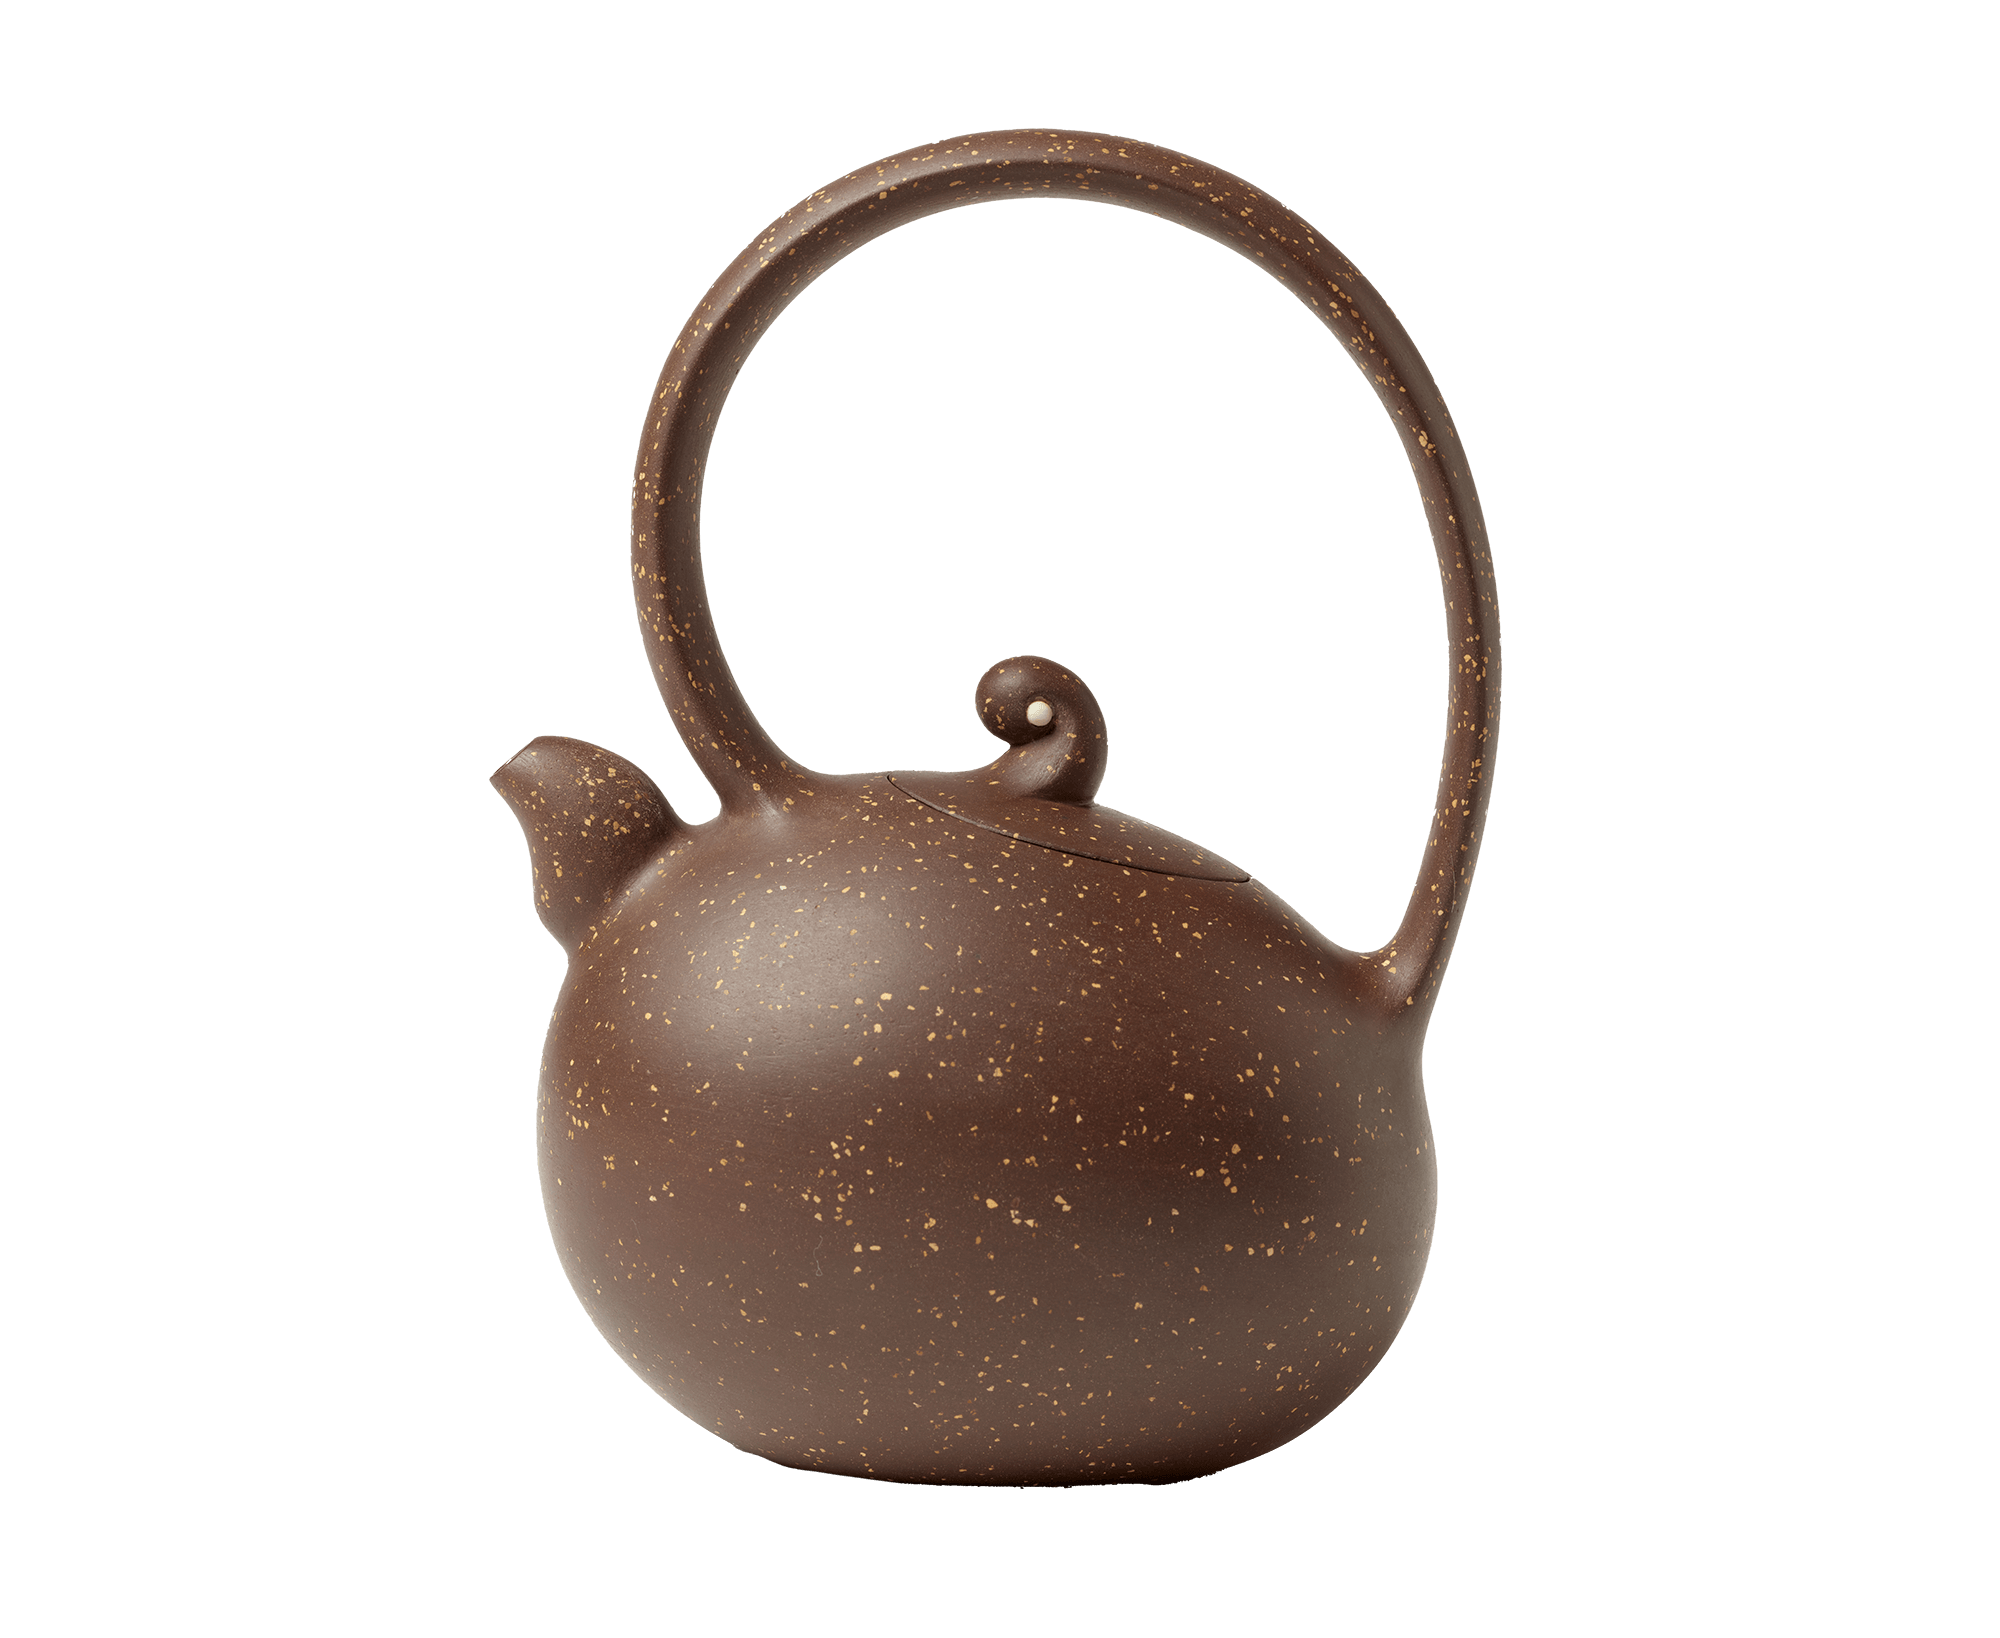 /Bulbous%20dark%20brown%20teapot%20with%20thick%2C%20short%20spout.%20Tall%20curving%20handle%20and%20curled%20finial%20on%20top.